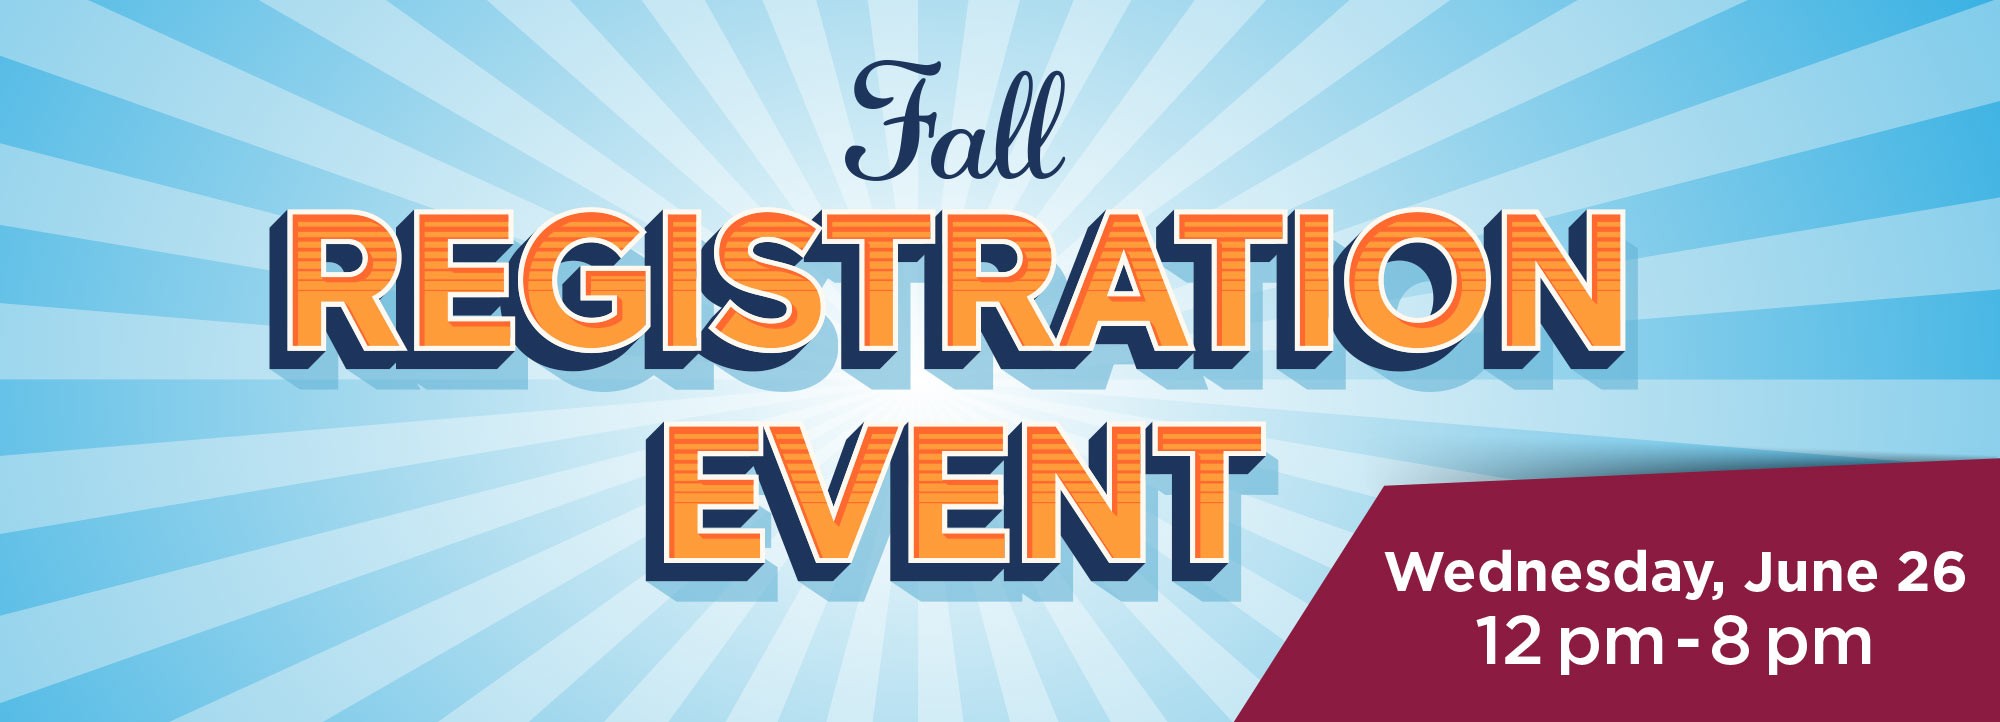 Fall Registration Event on Wednesday, June 26 from 12-8 pm